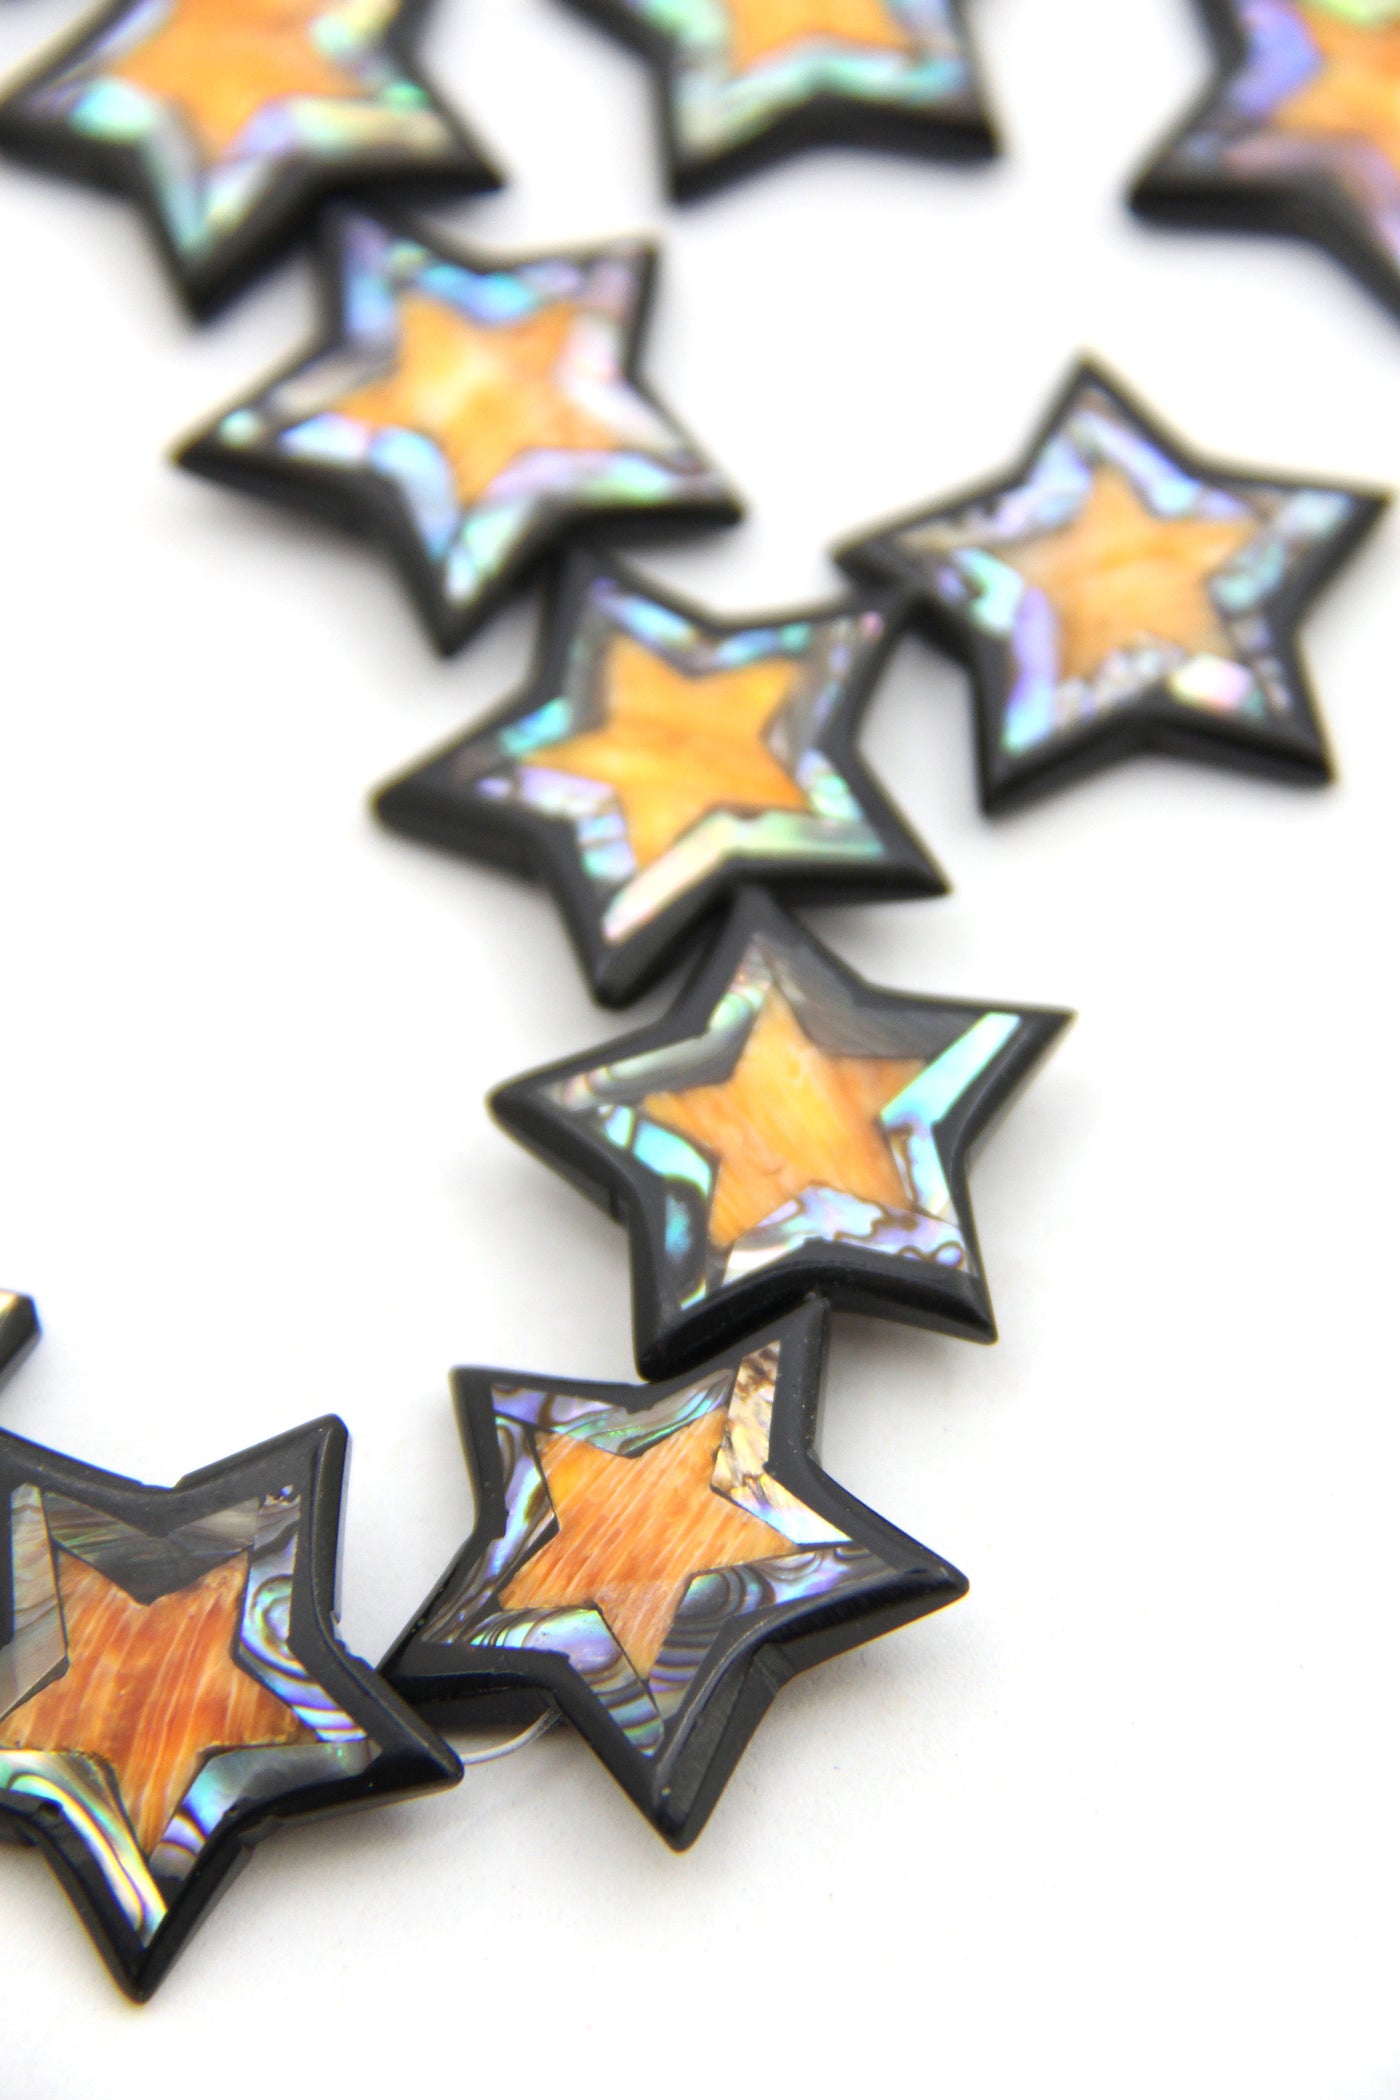 Star Shaped Ebony Wood, Abalone, and Spiny Oyster Inlaid Bead, 1 Charm